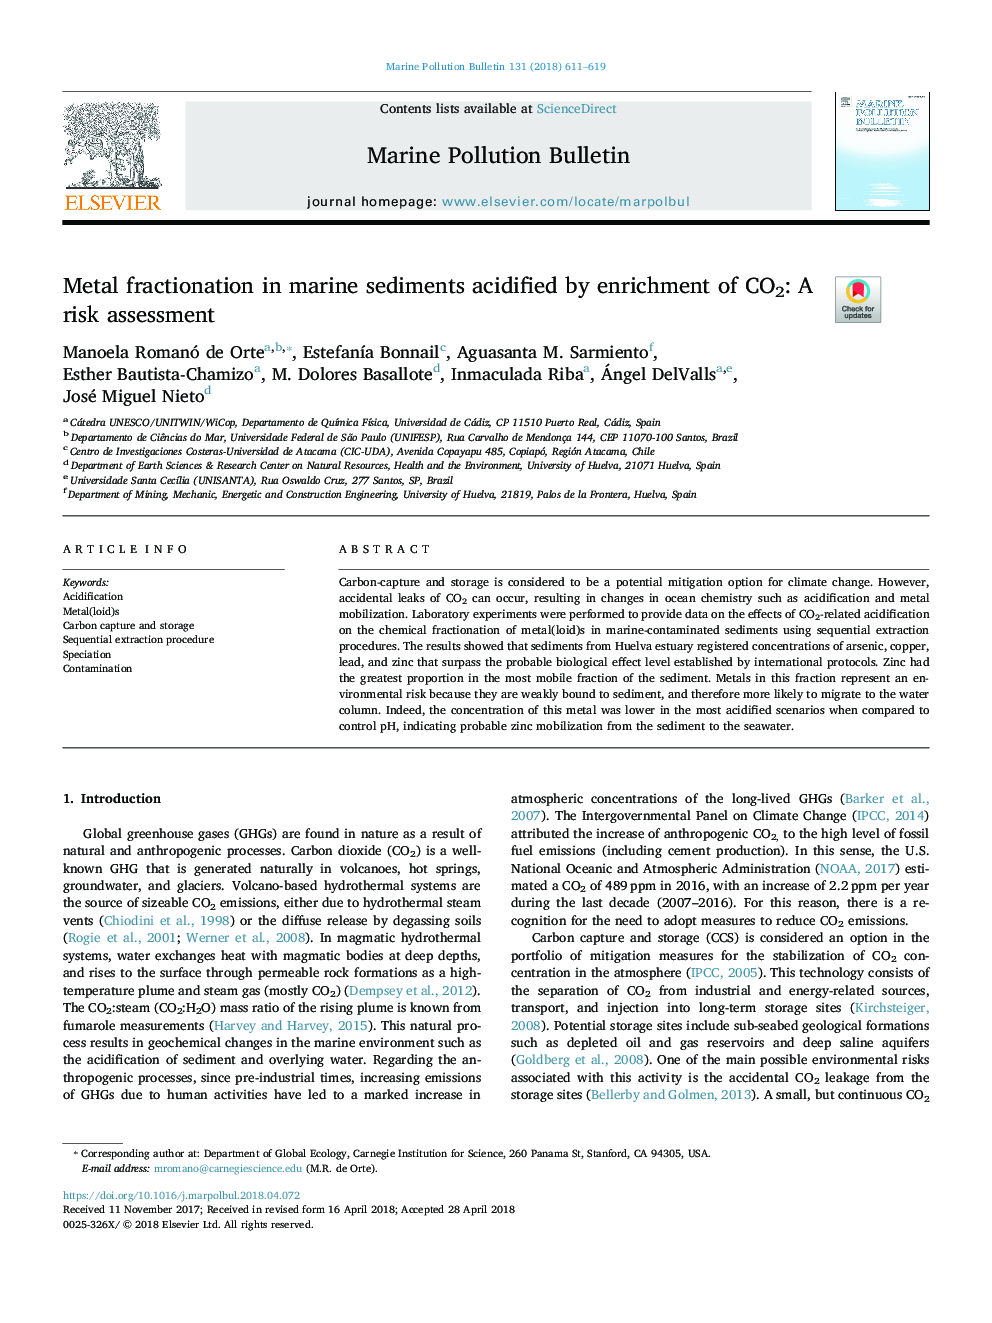 Metal fractionation in marine sediments acidified by enrichment of CO2: A risk assessment